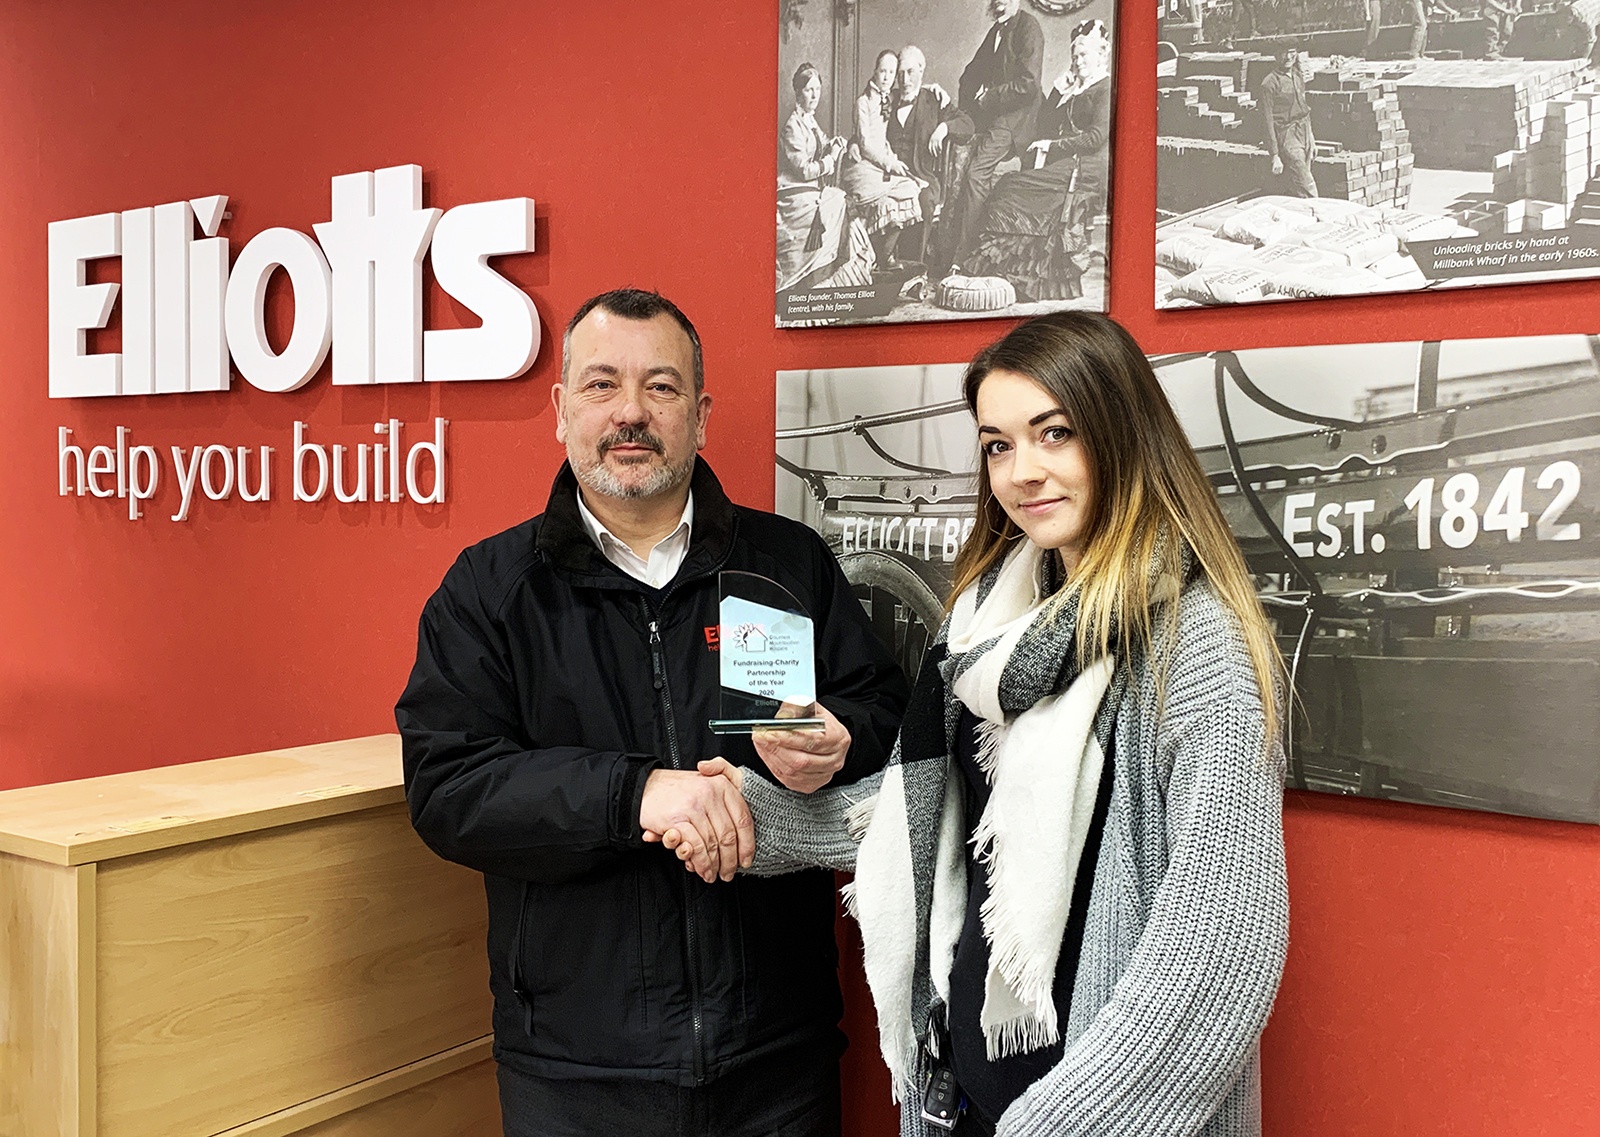 Rachel Rawlings, presents the “Fundraising Charity Partner of the Year” award to Ed Butcher from Elliotts